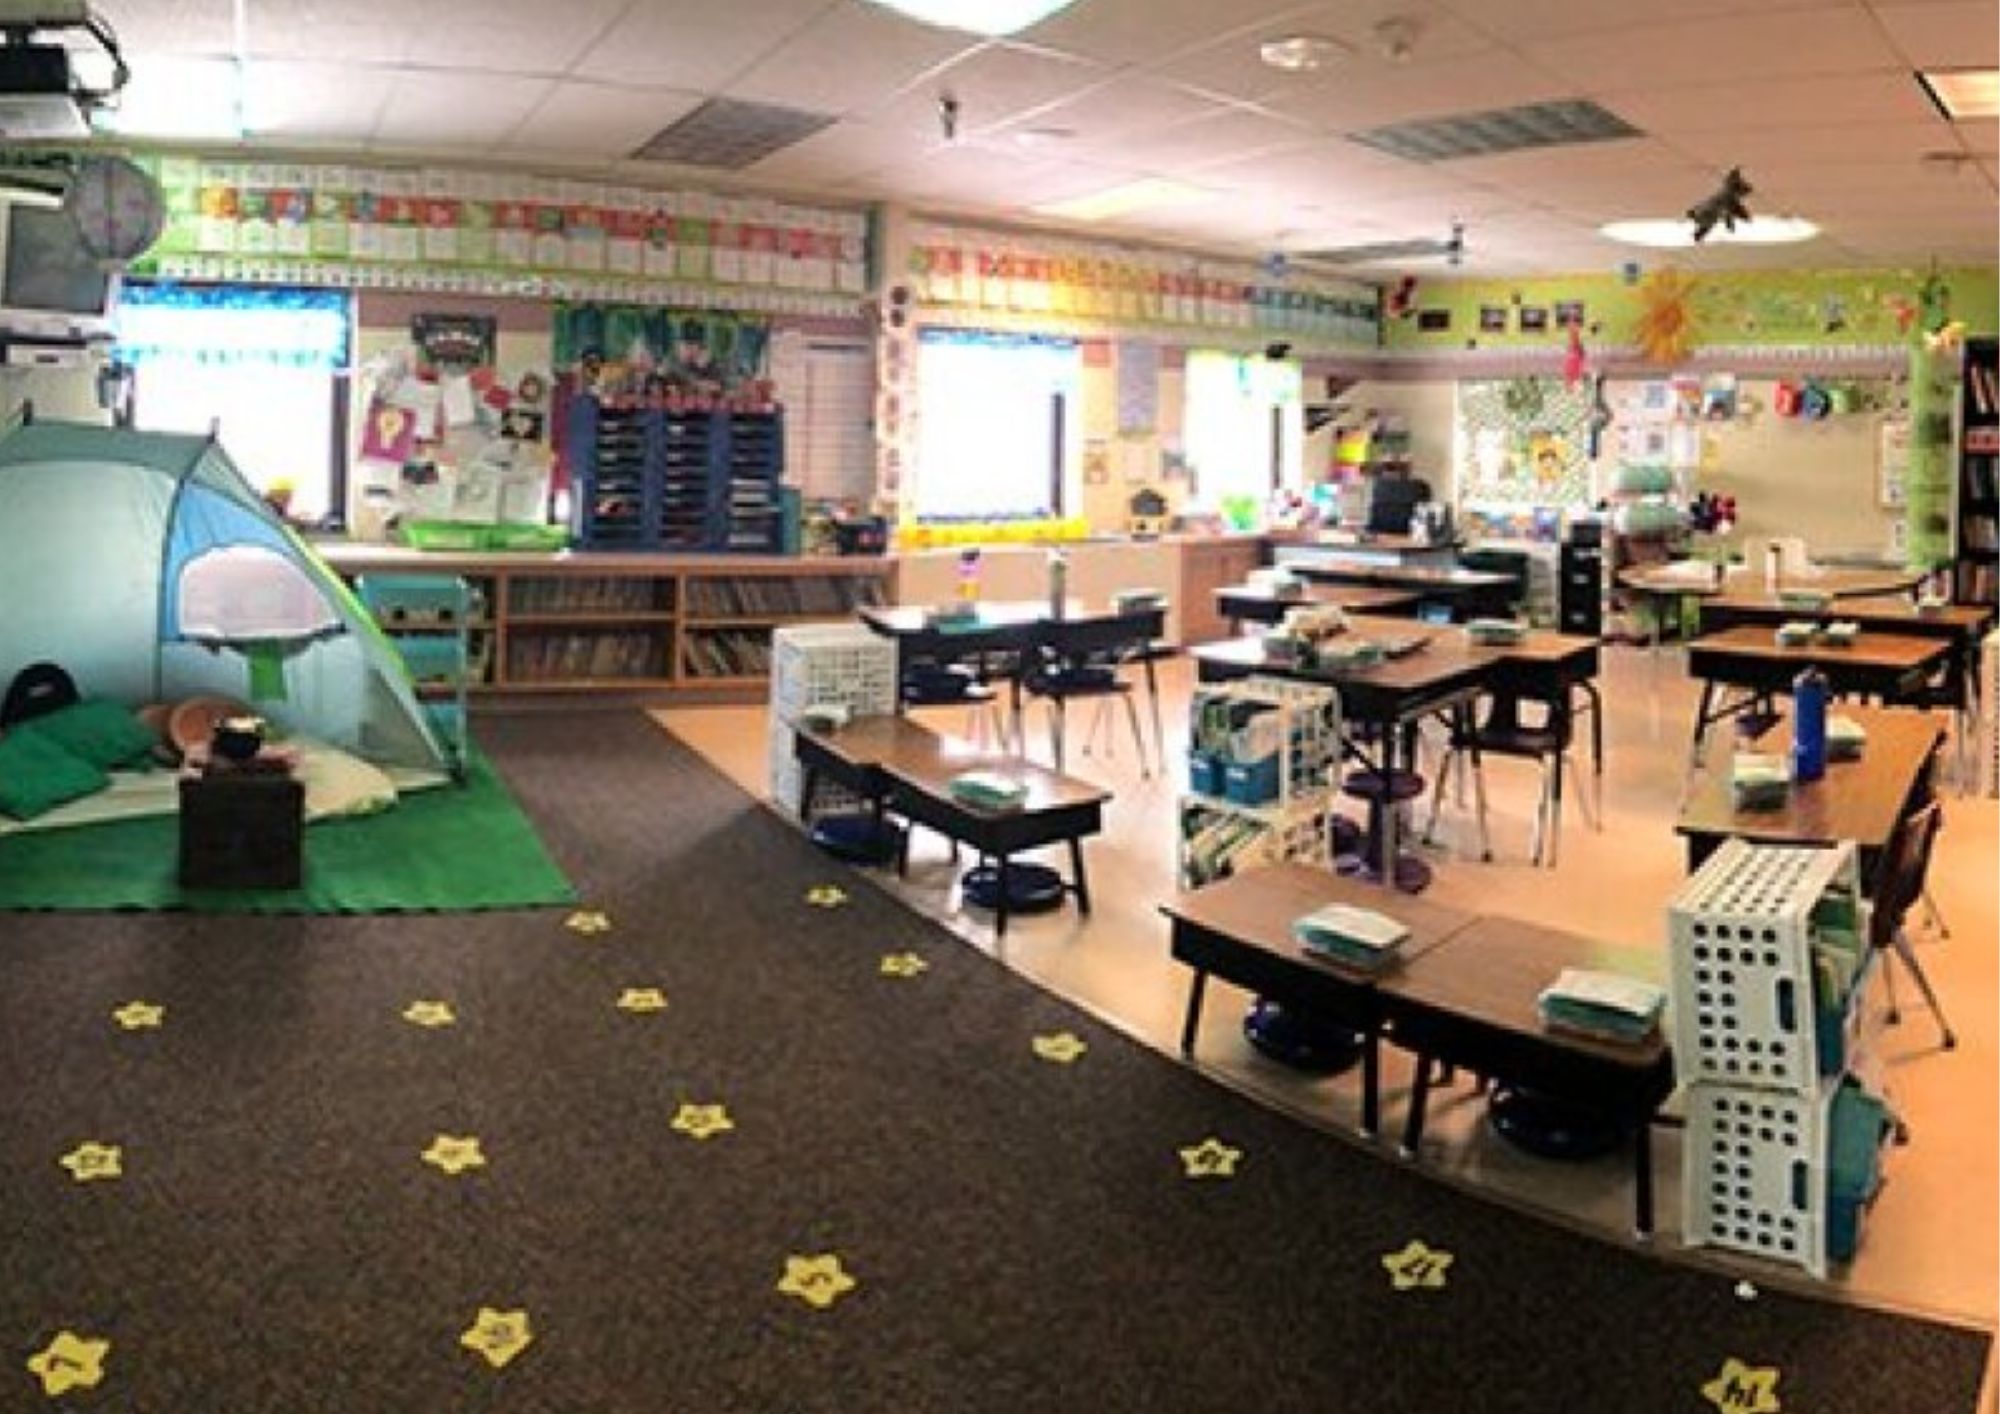 Commercial School Learning Environment